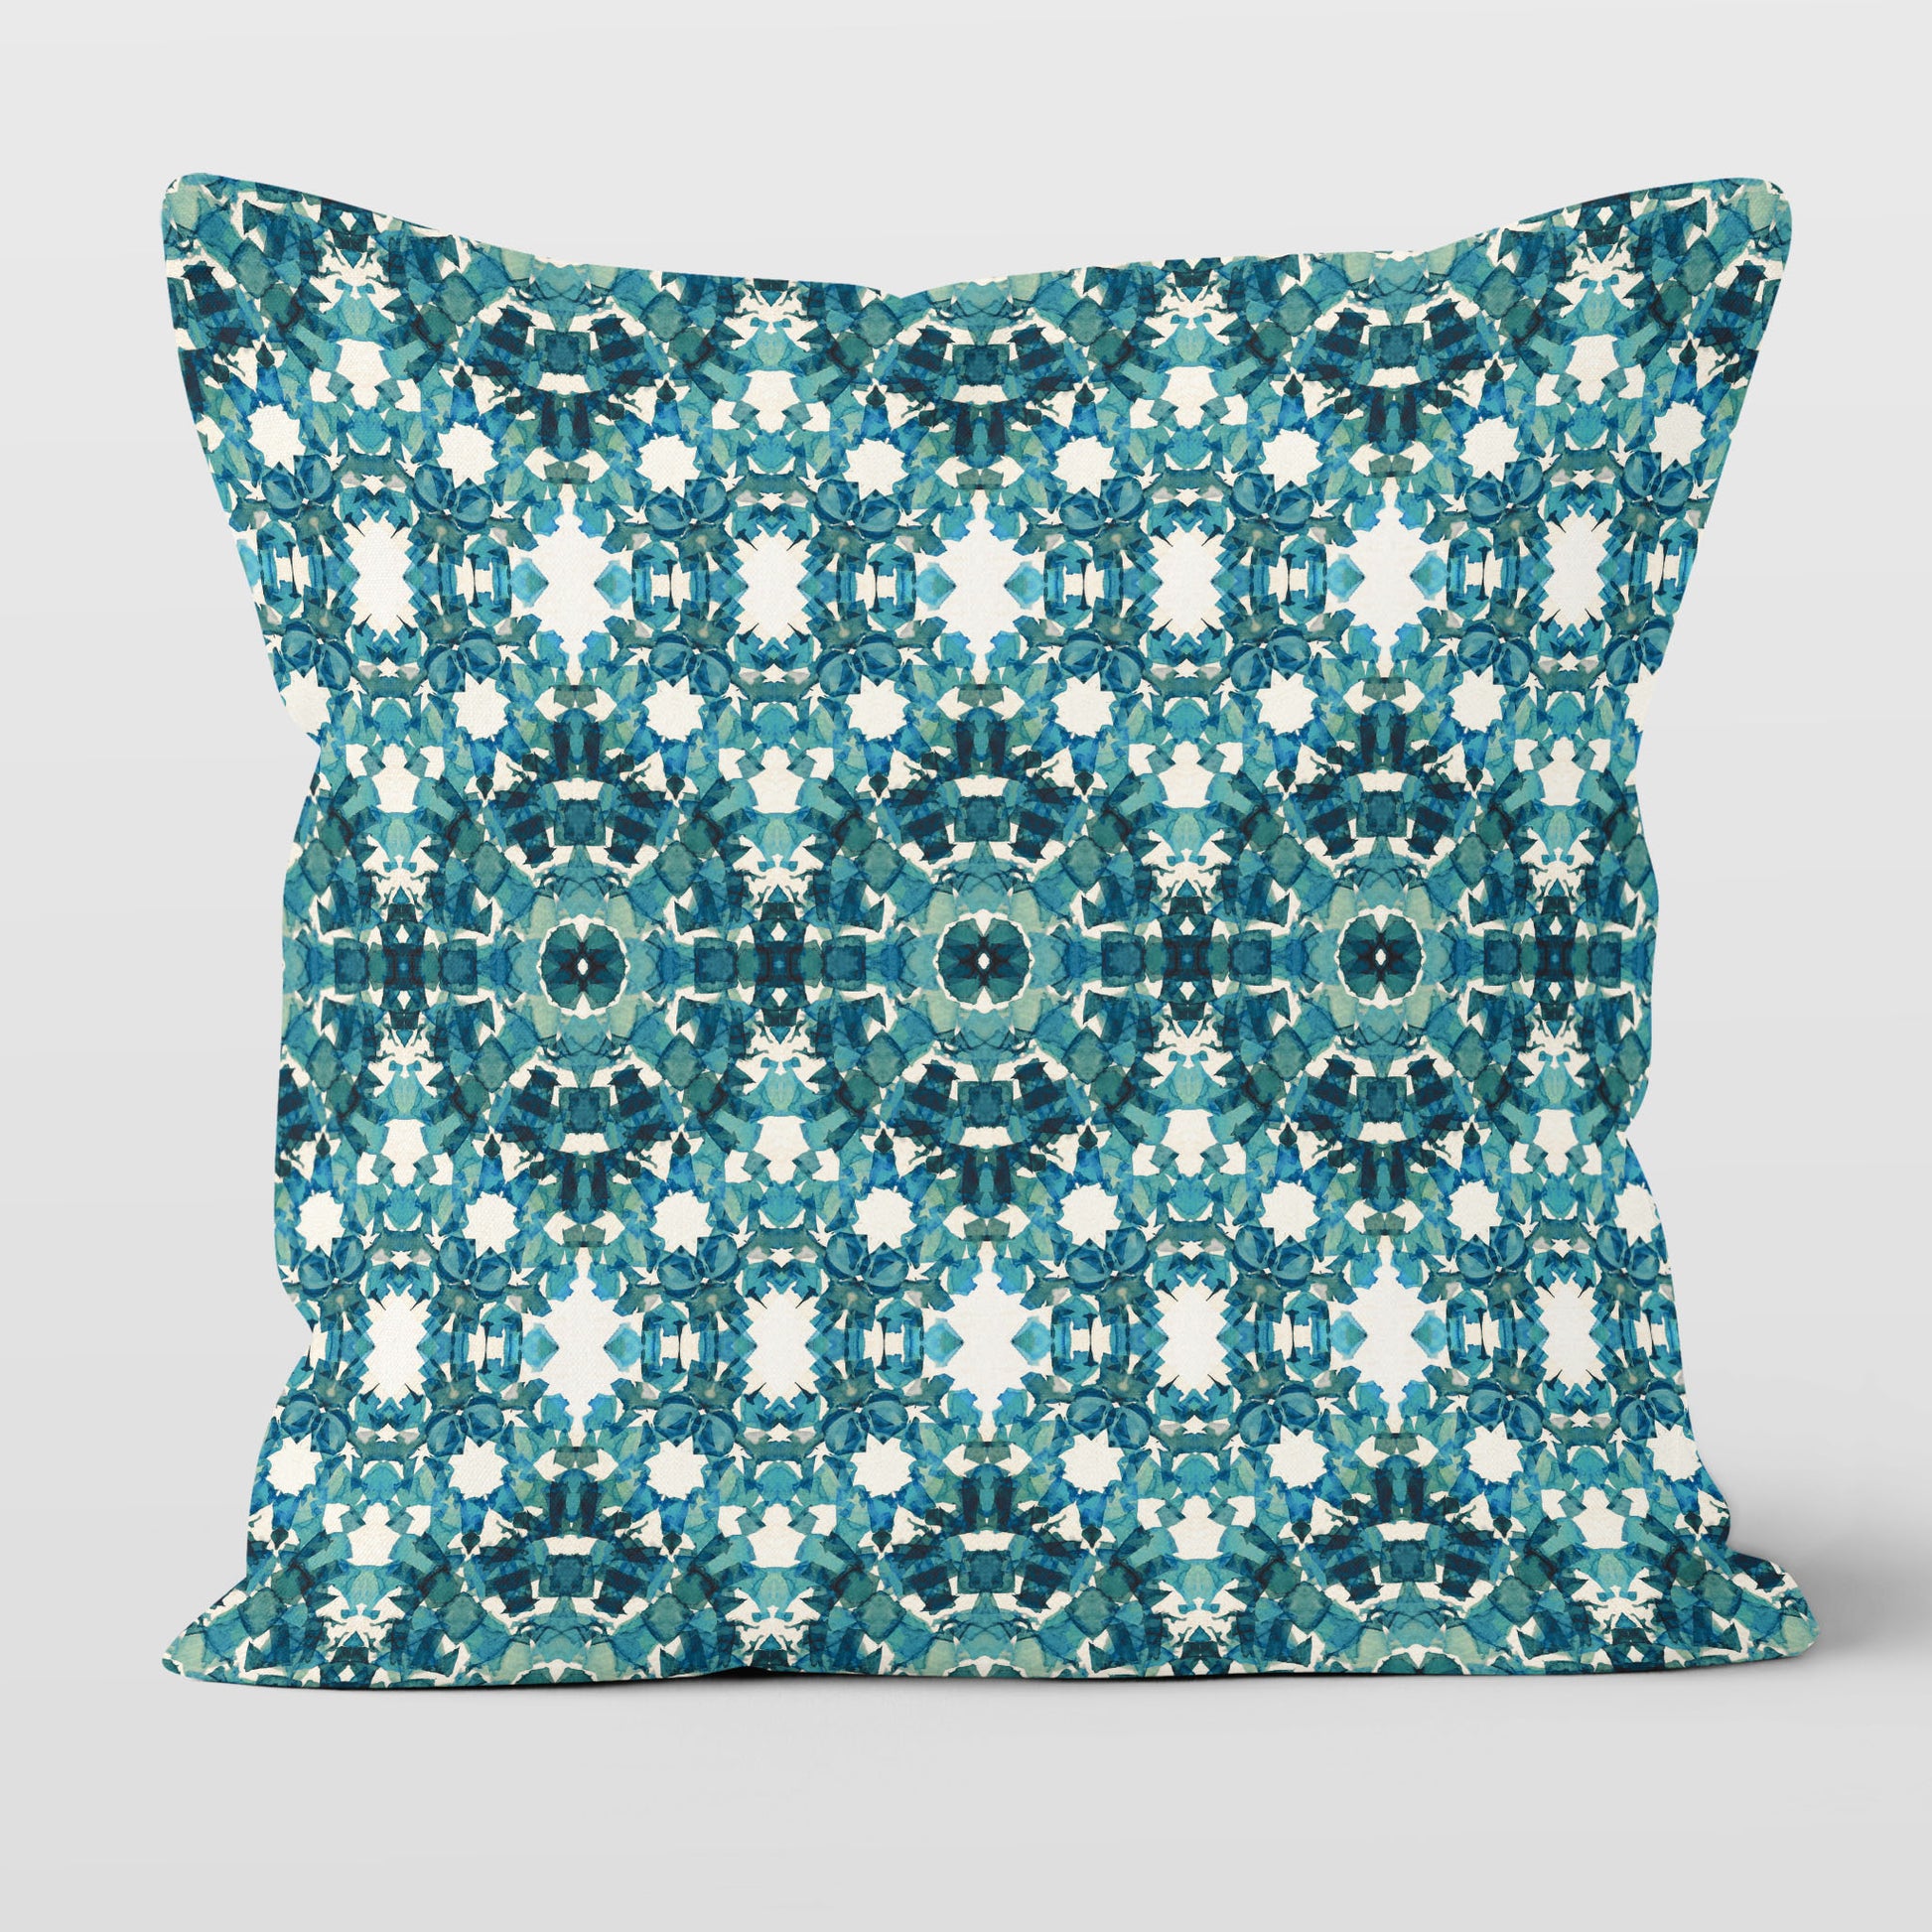 Square throw pillow featuring an abstract teal pattern